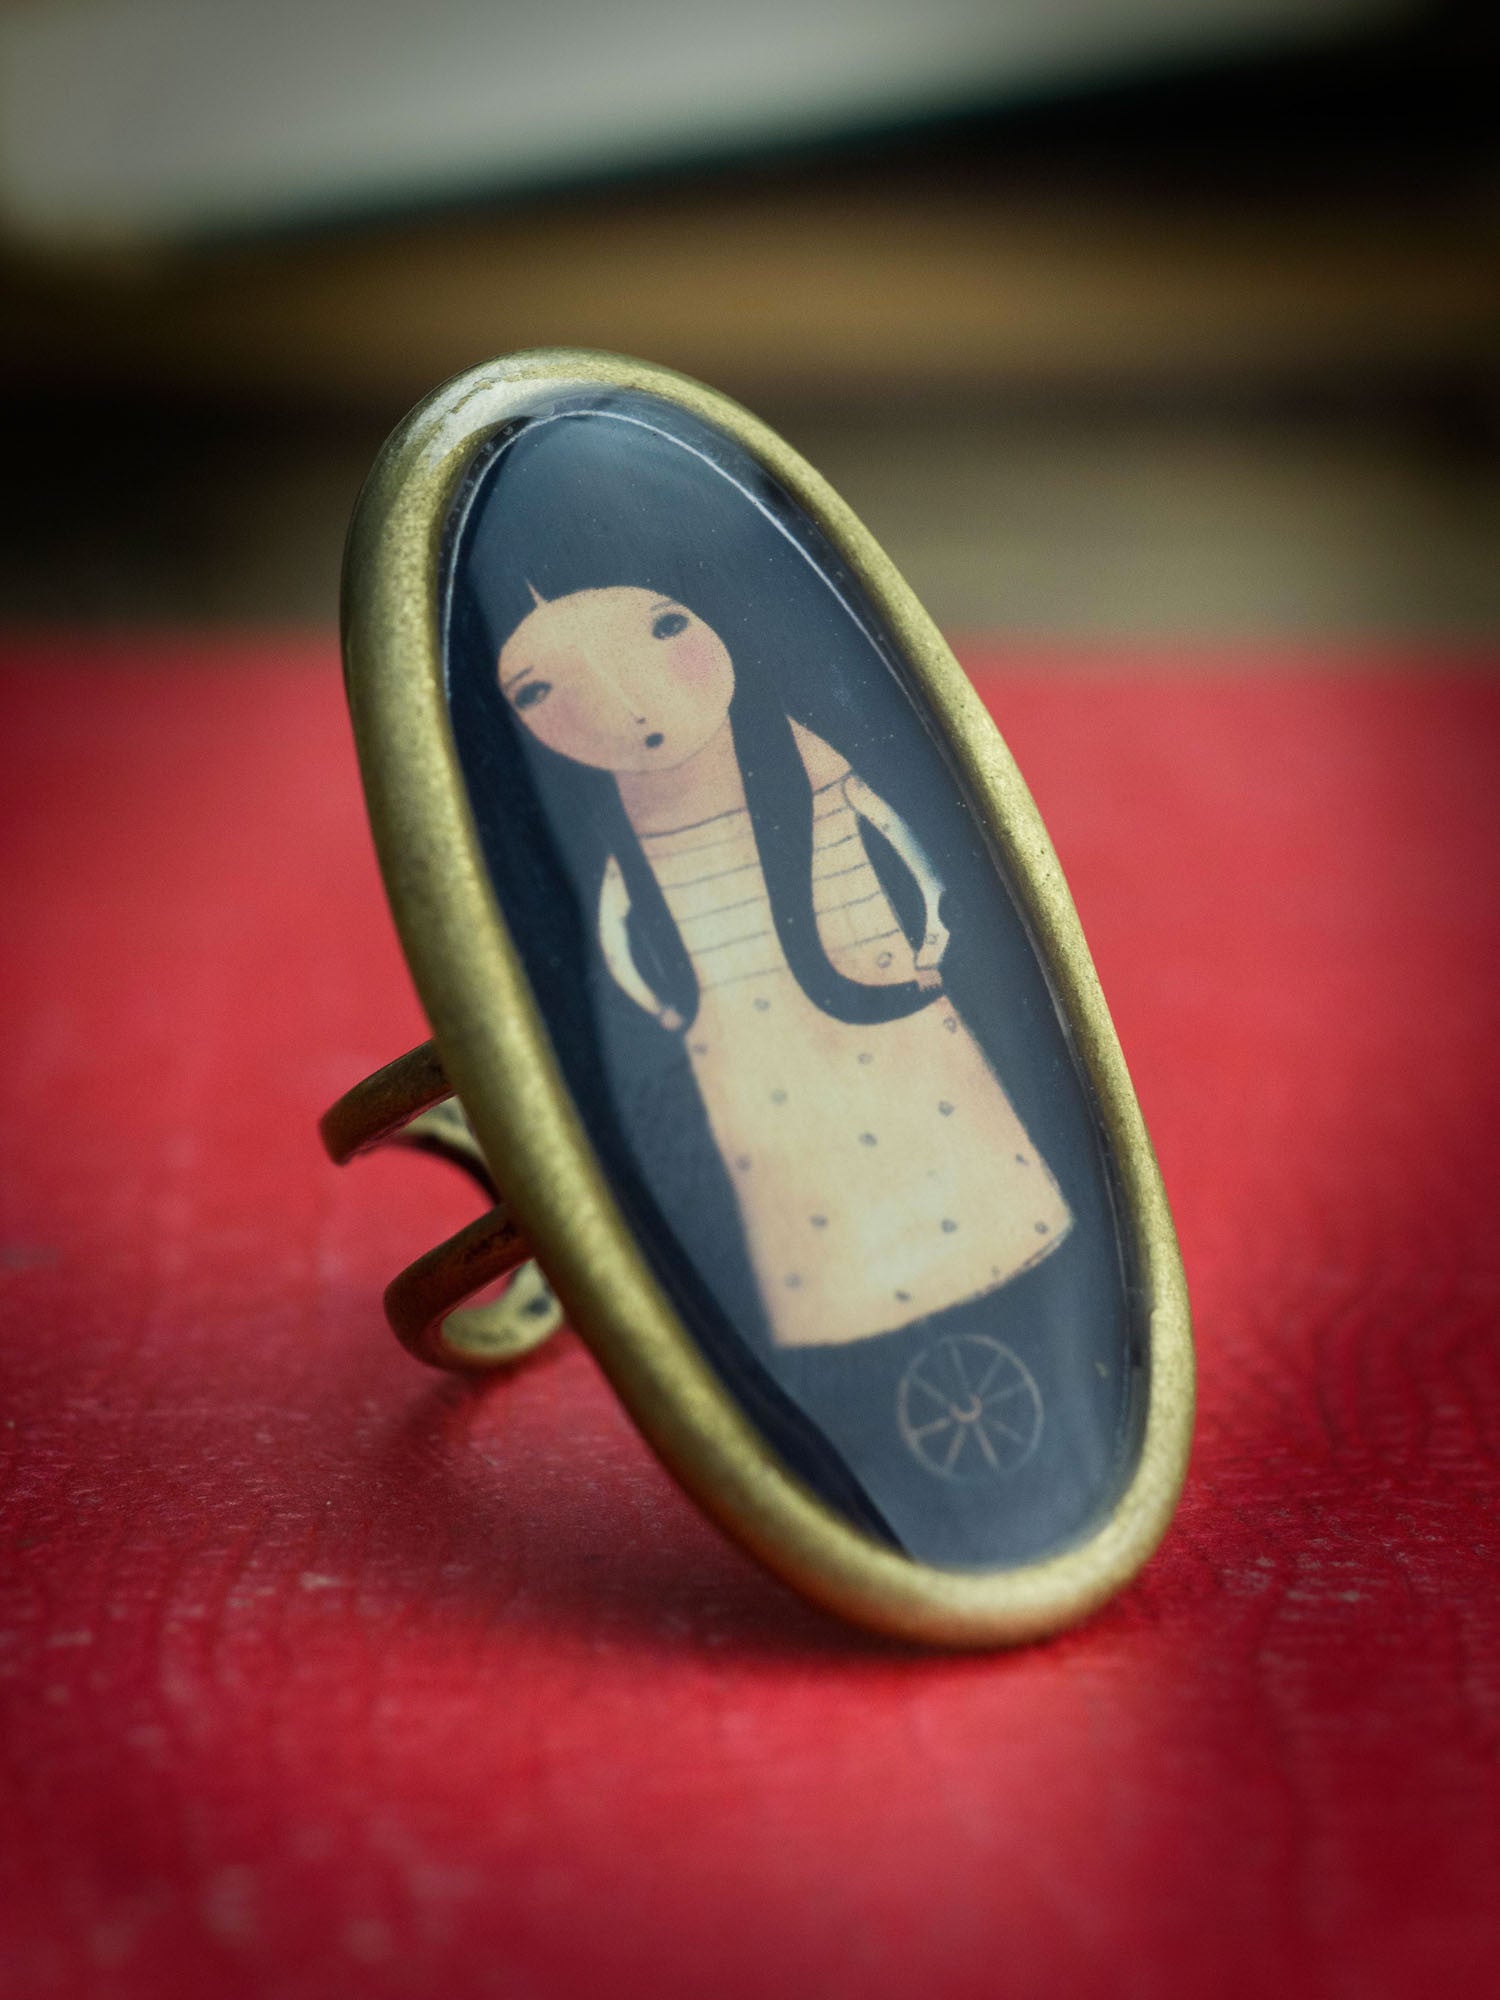 Handmade Ring by Danita Art. A surreal painting of a girl in unicycle wheels make this piece a one of a kind work of wearable art.